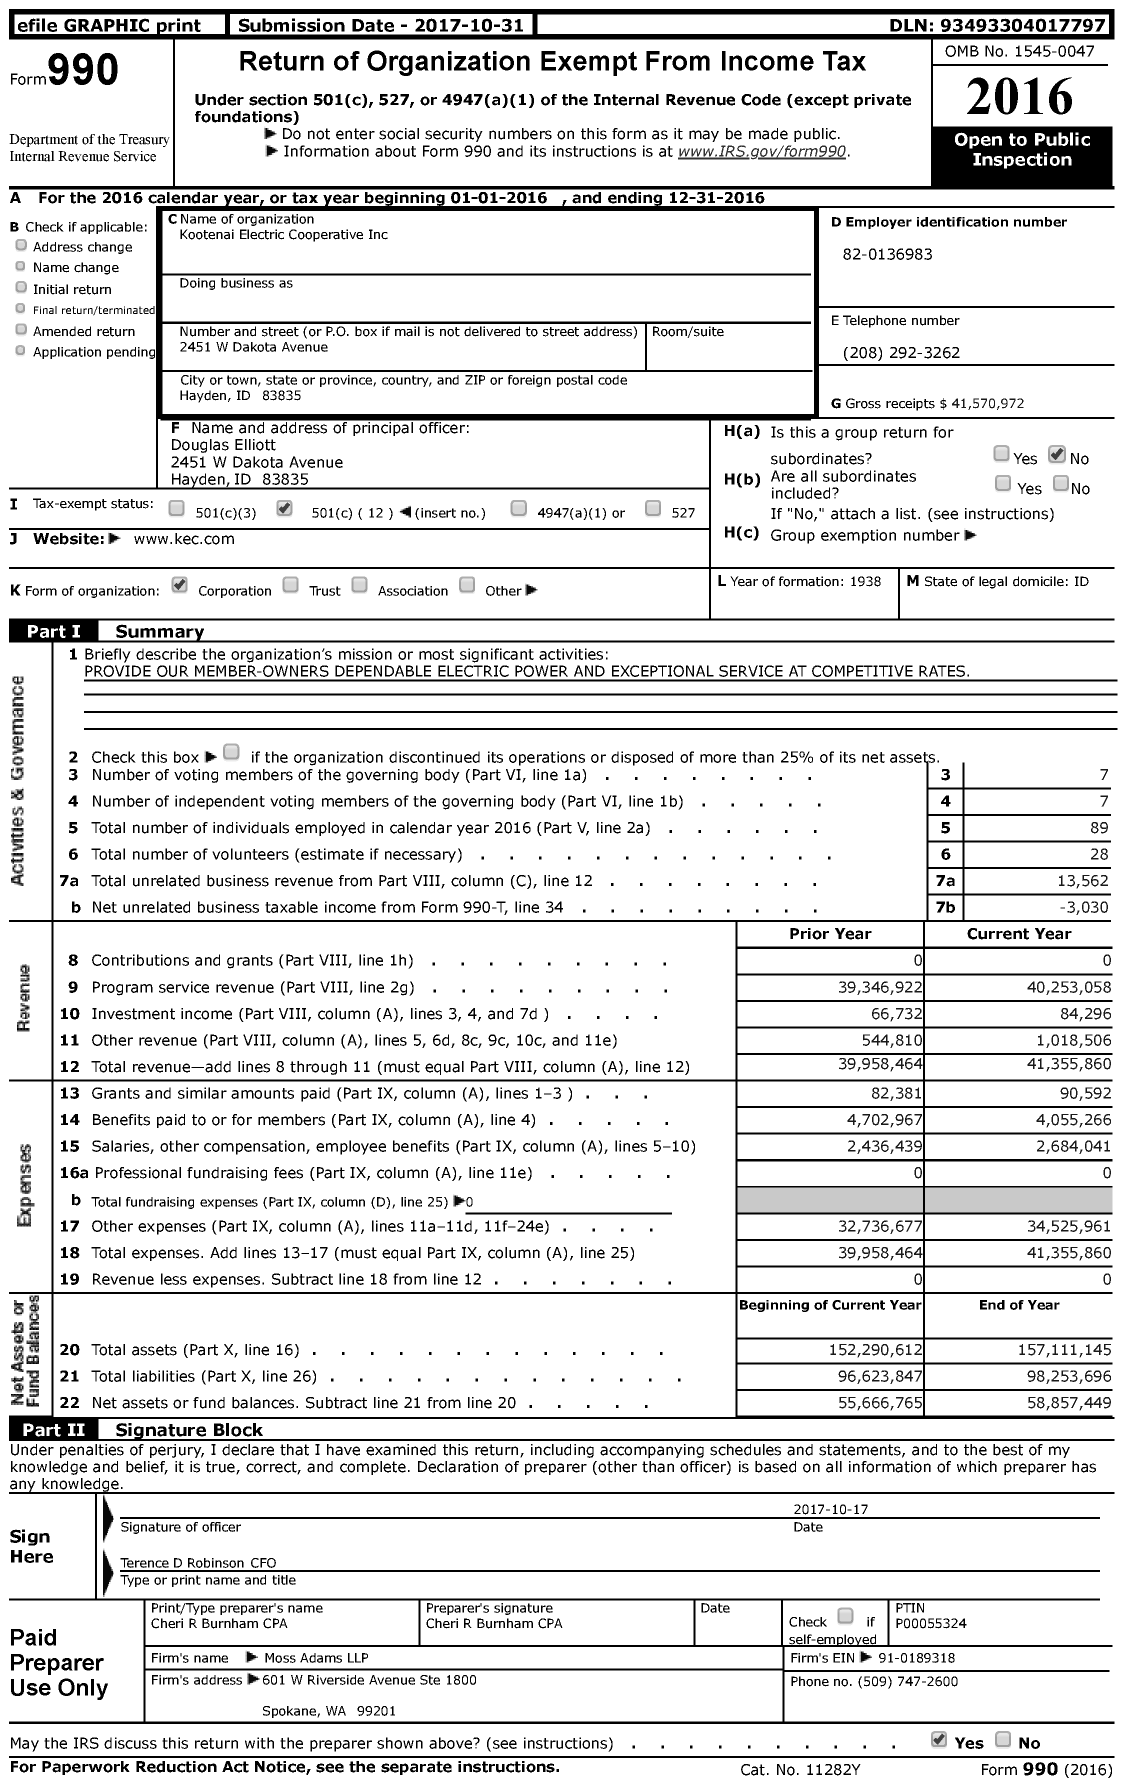 Image of first page of 2016 Form 990 for Kootenai Electric Cooperative (KEC)